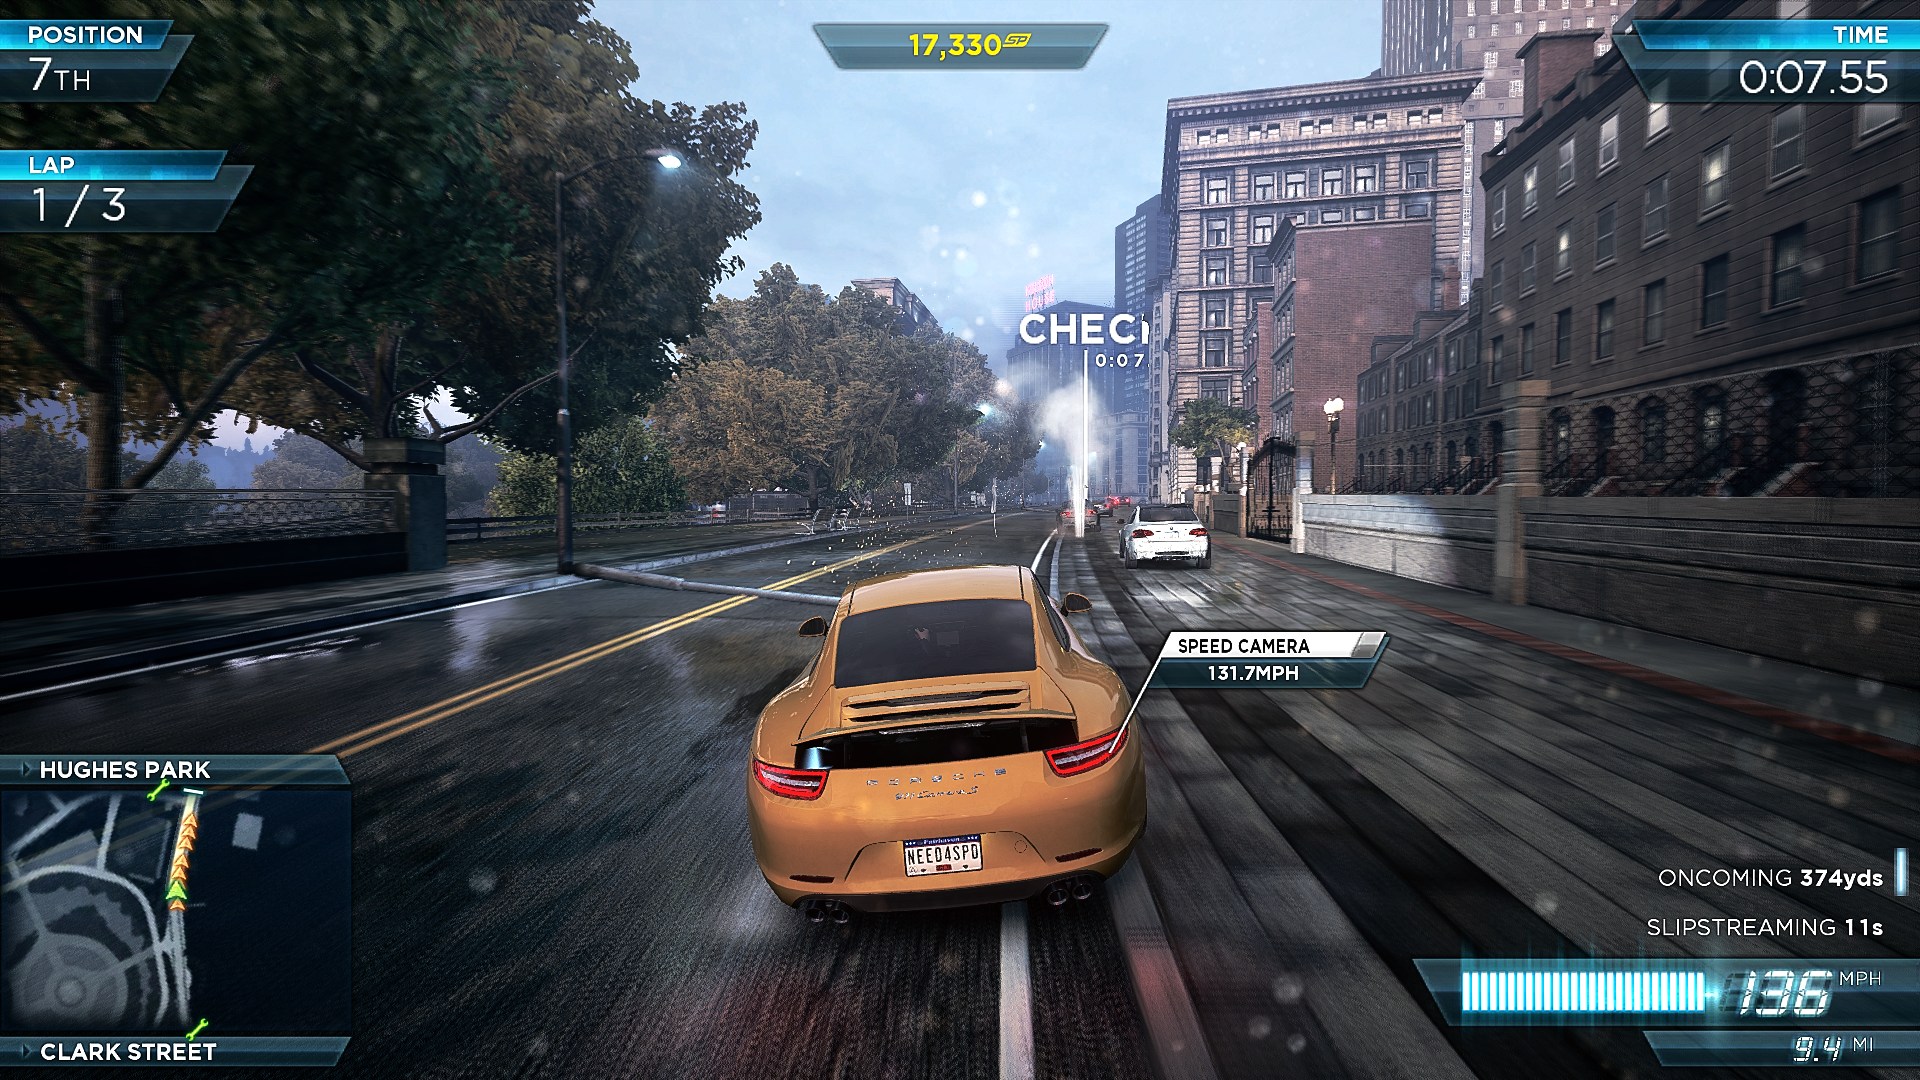 Need For Speed Most Wanted, PC